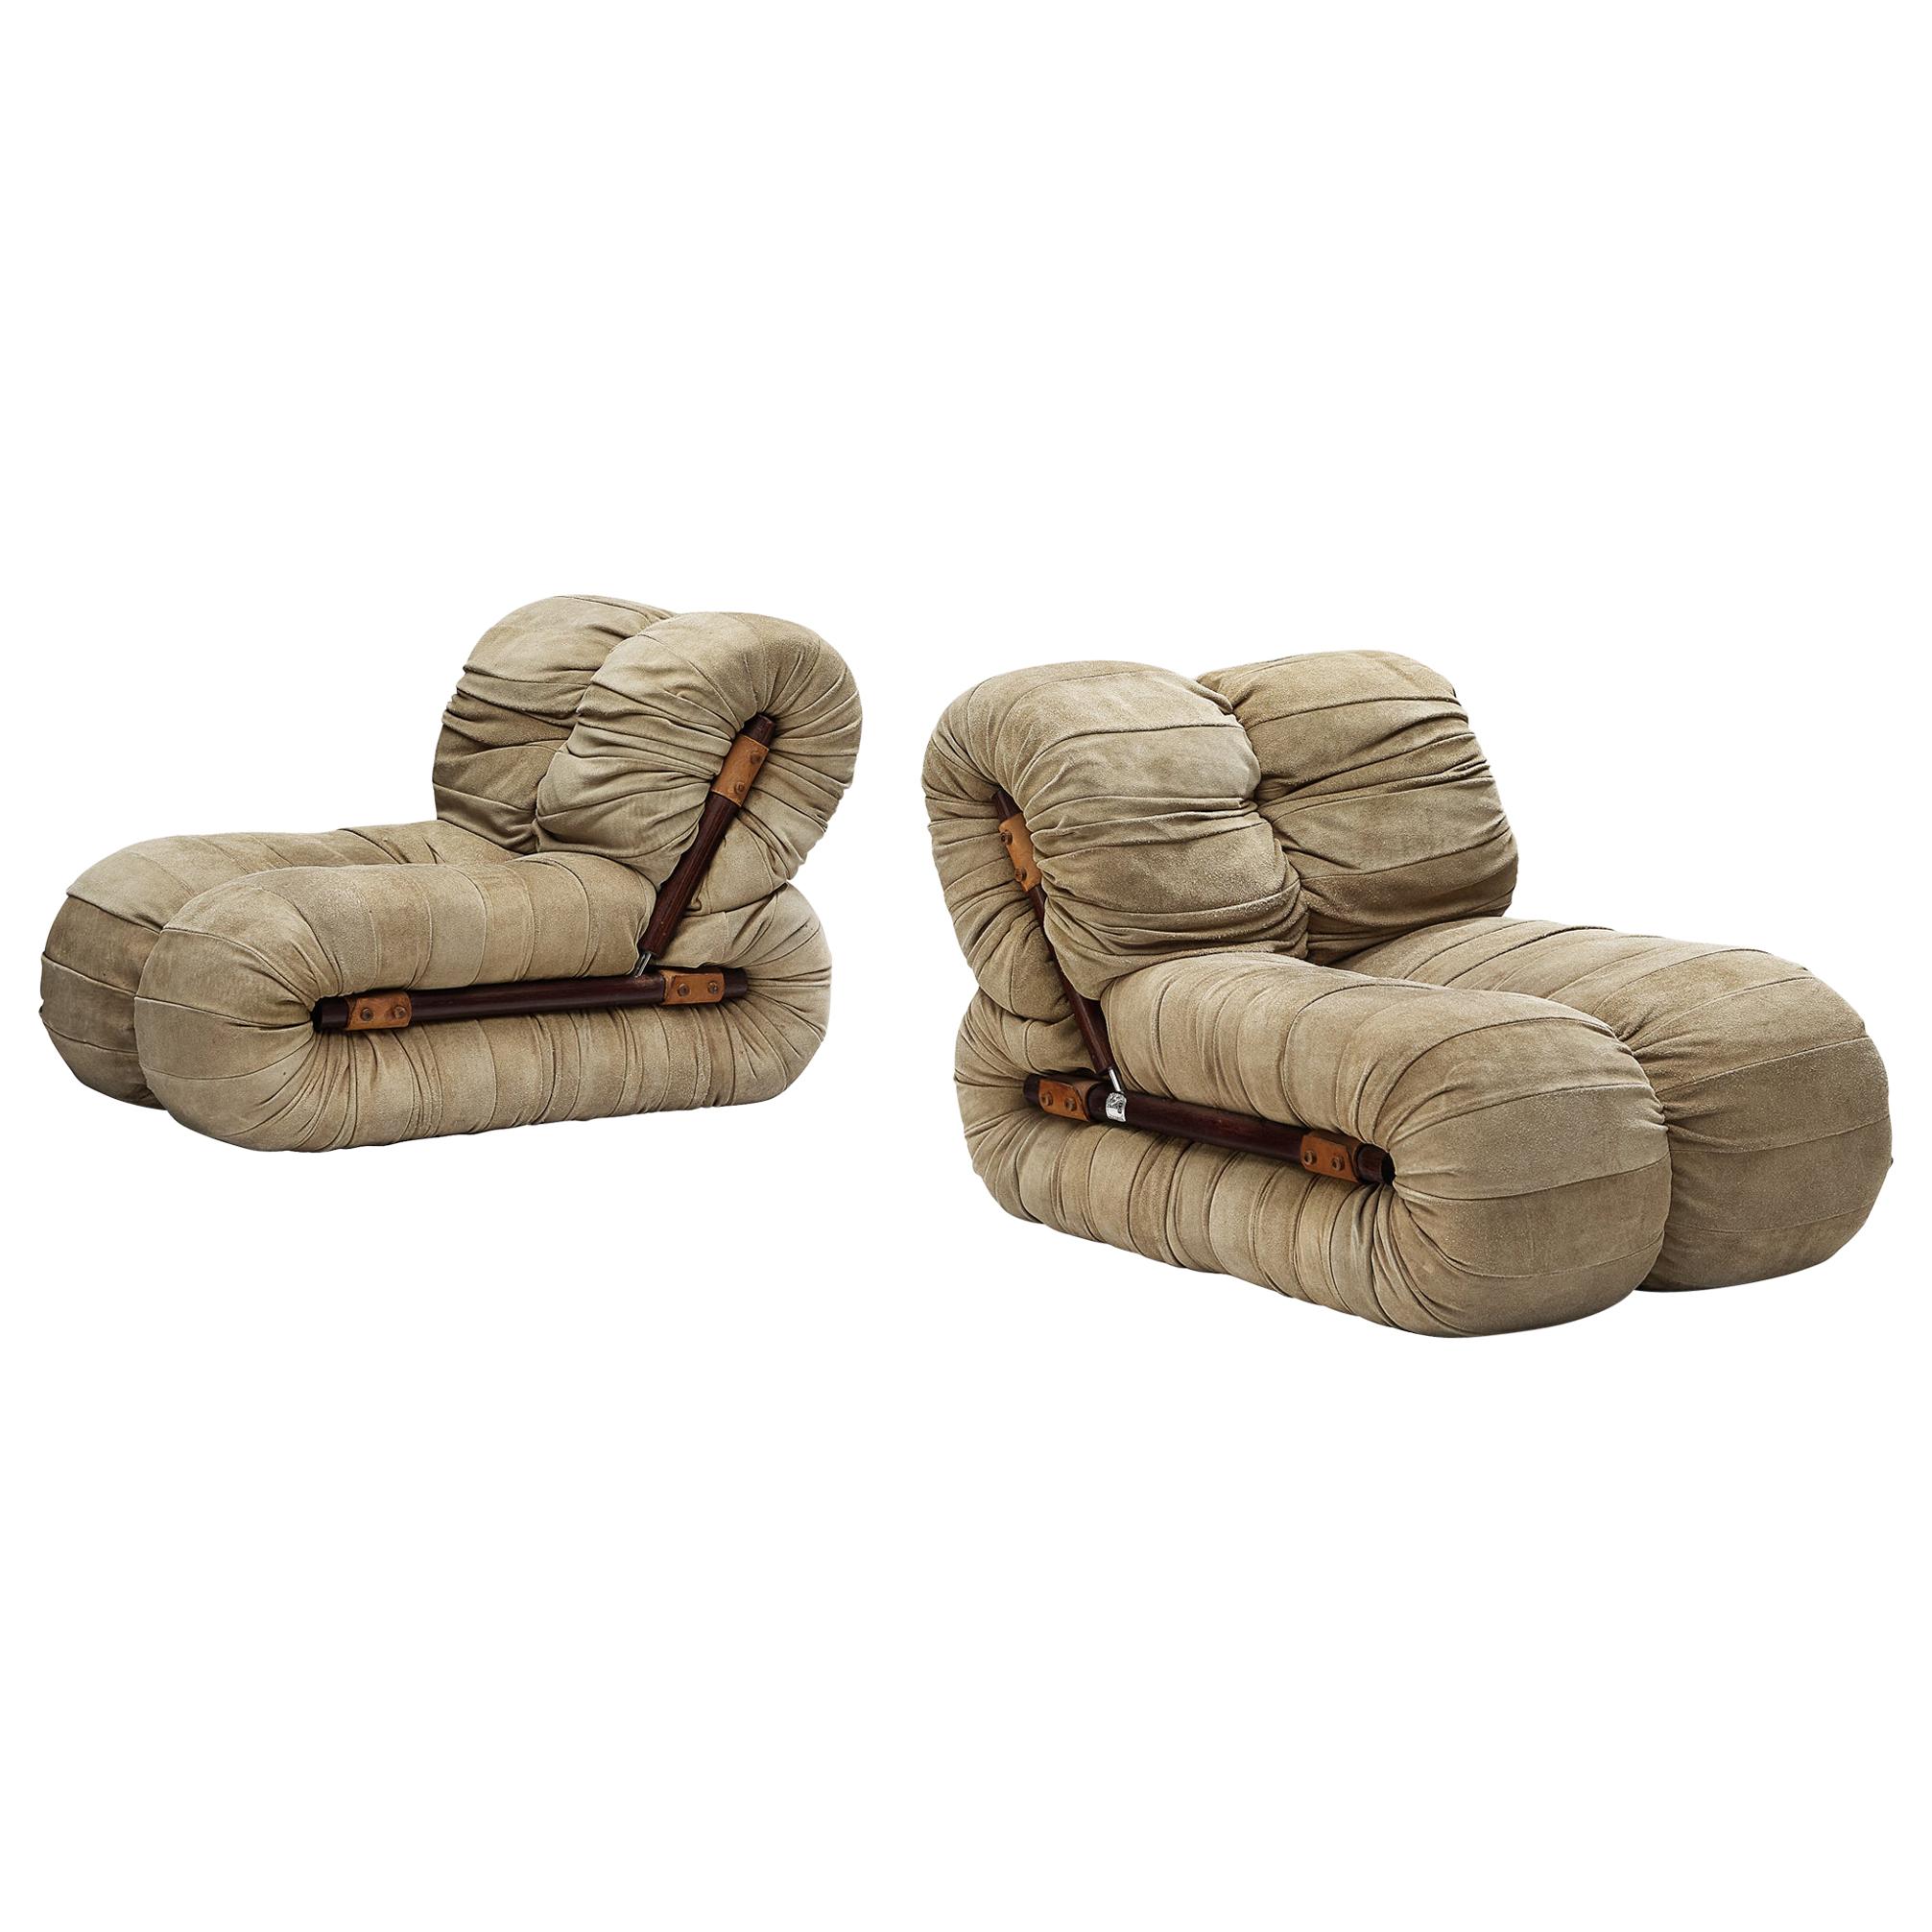 Percival Lafer Lounge Chairs in Nubuck Leather